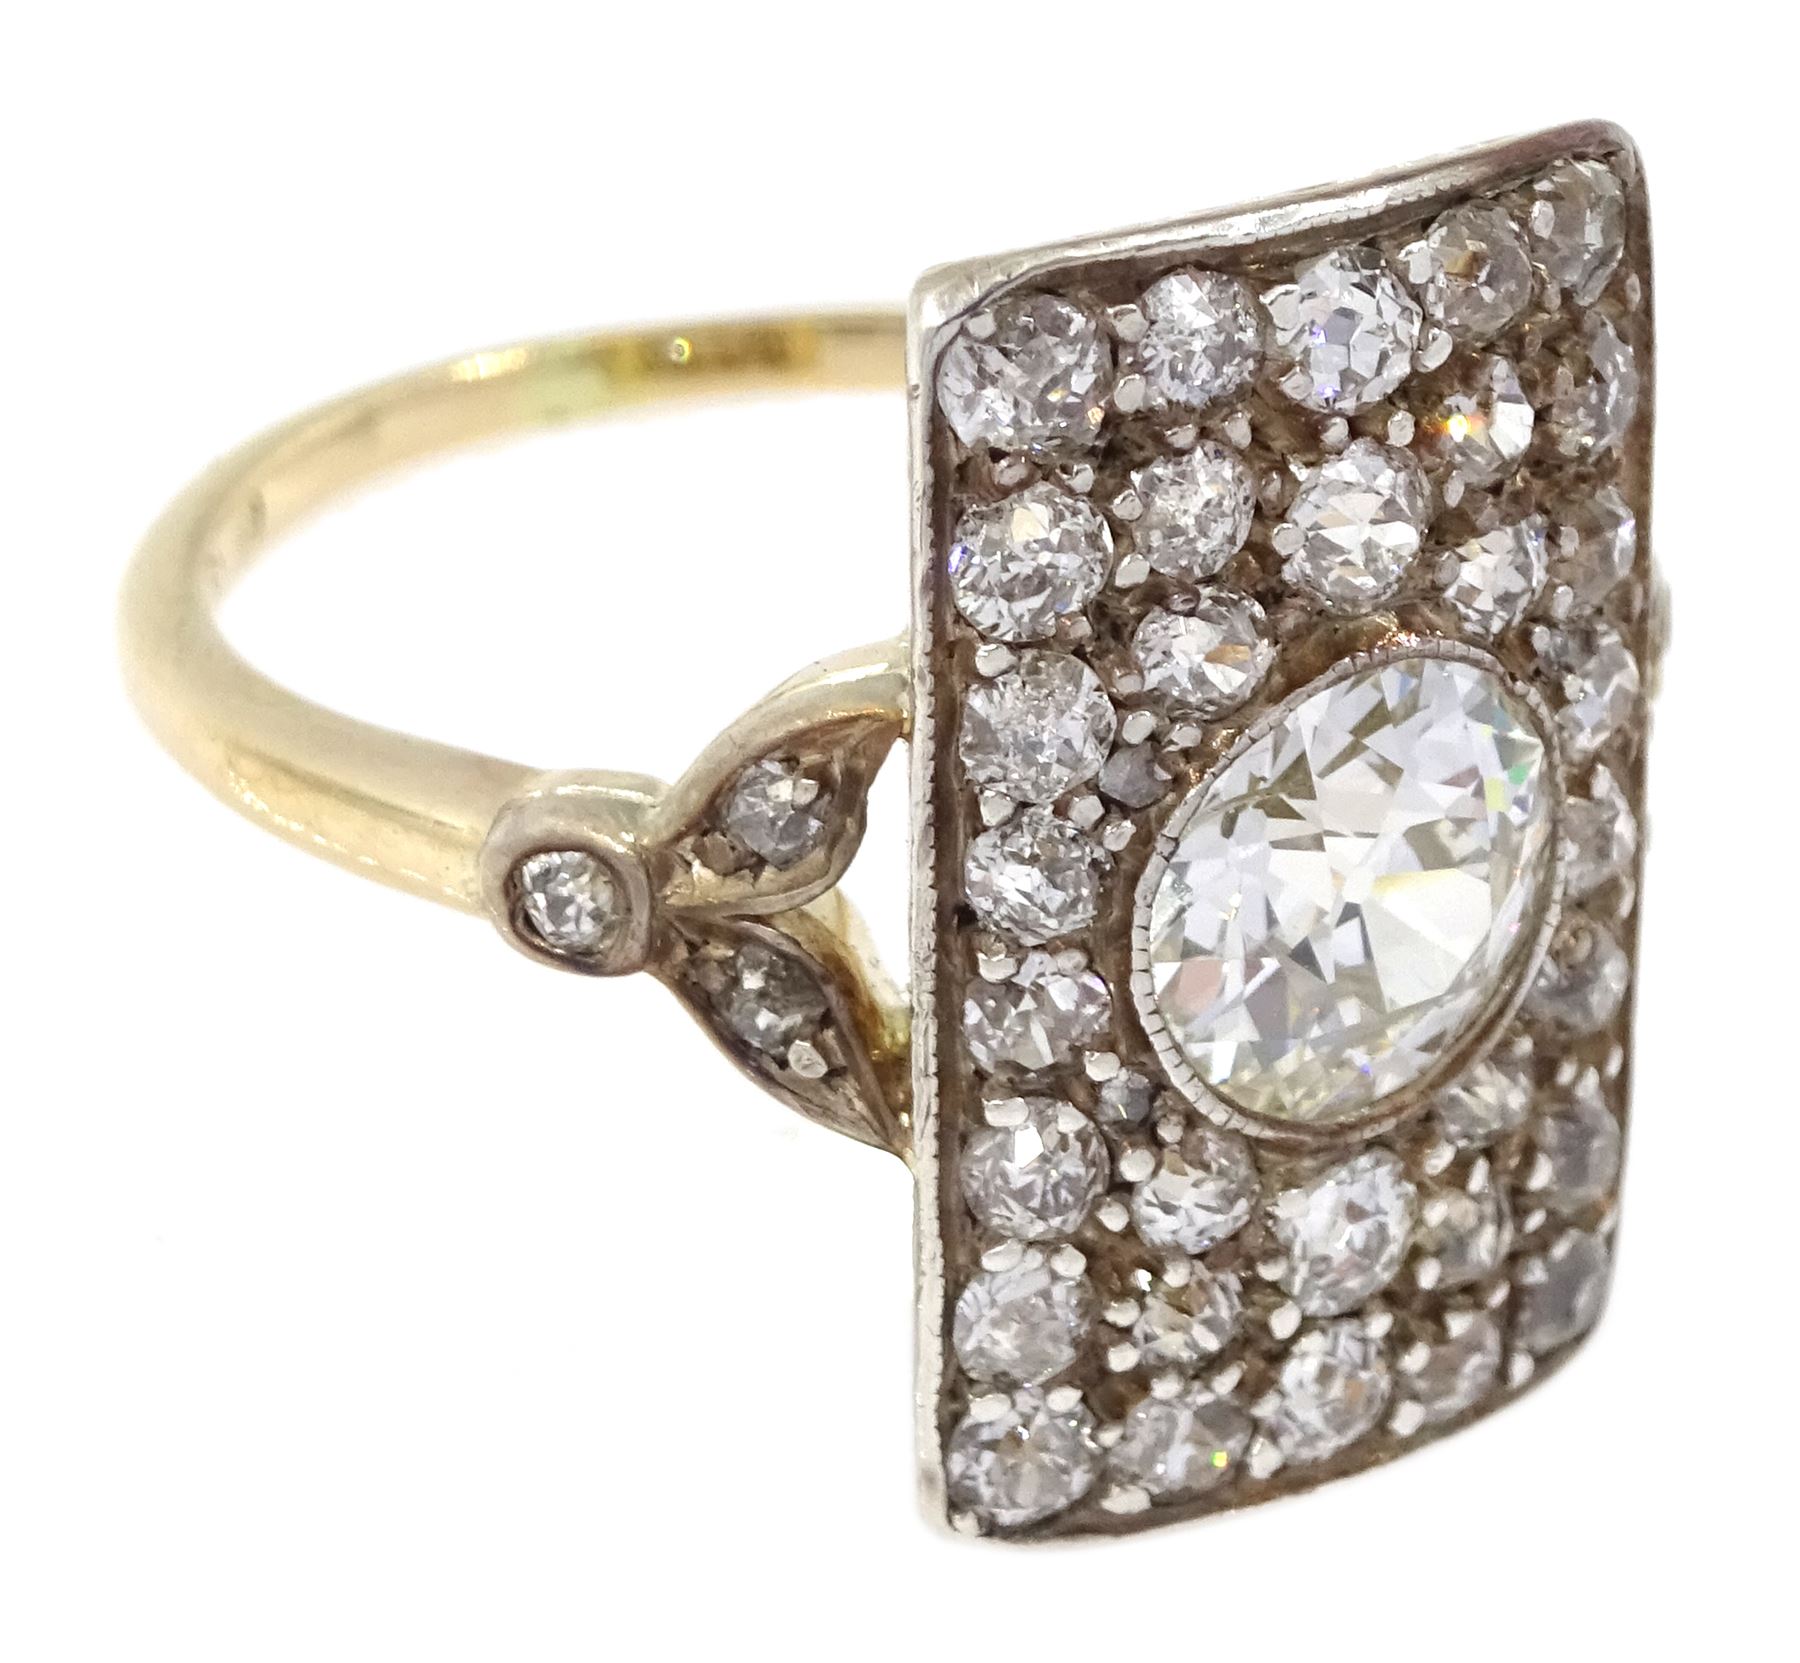 Austrian/German Art Deco 14ct gold and silver old European cut diamond panel ring - Image 3 of 4